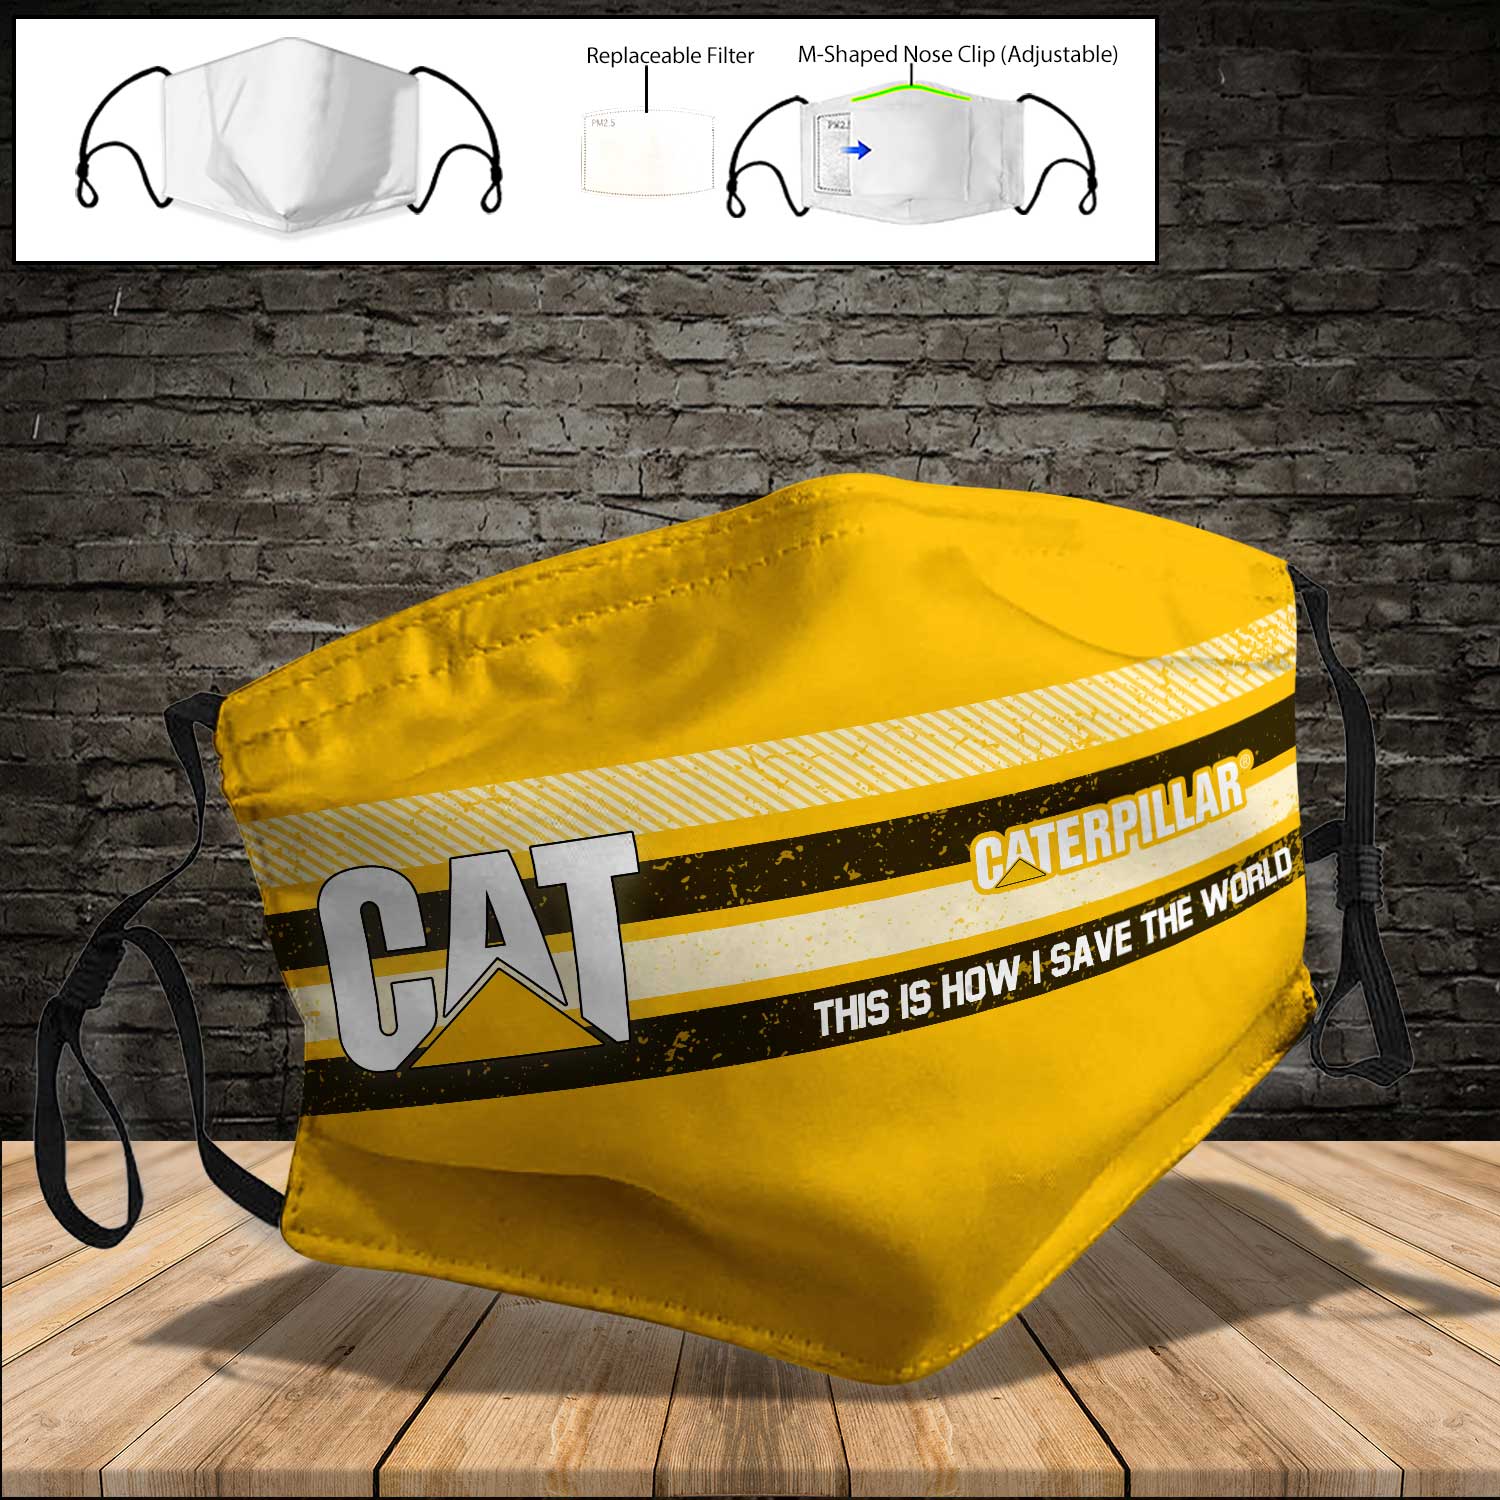 Caterpillar inc this is how i save the world full printing face mask 3